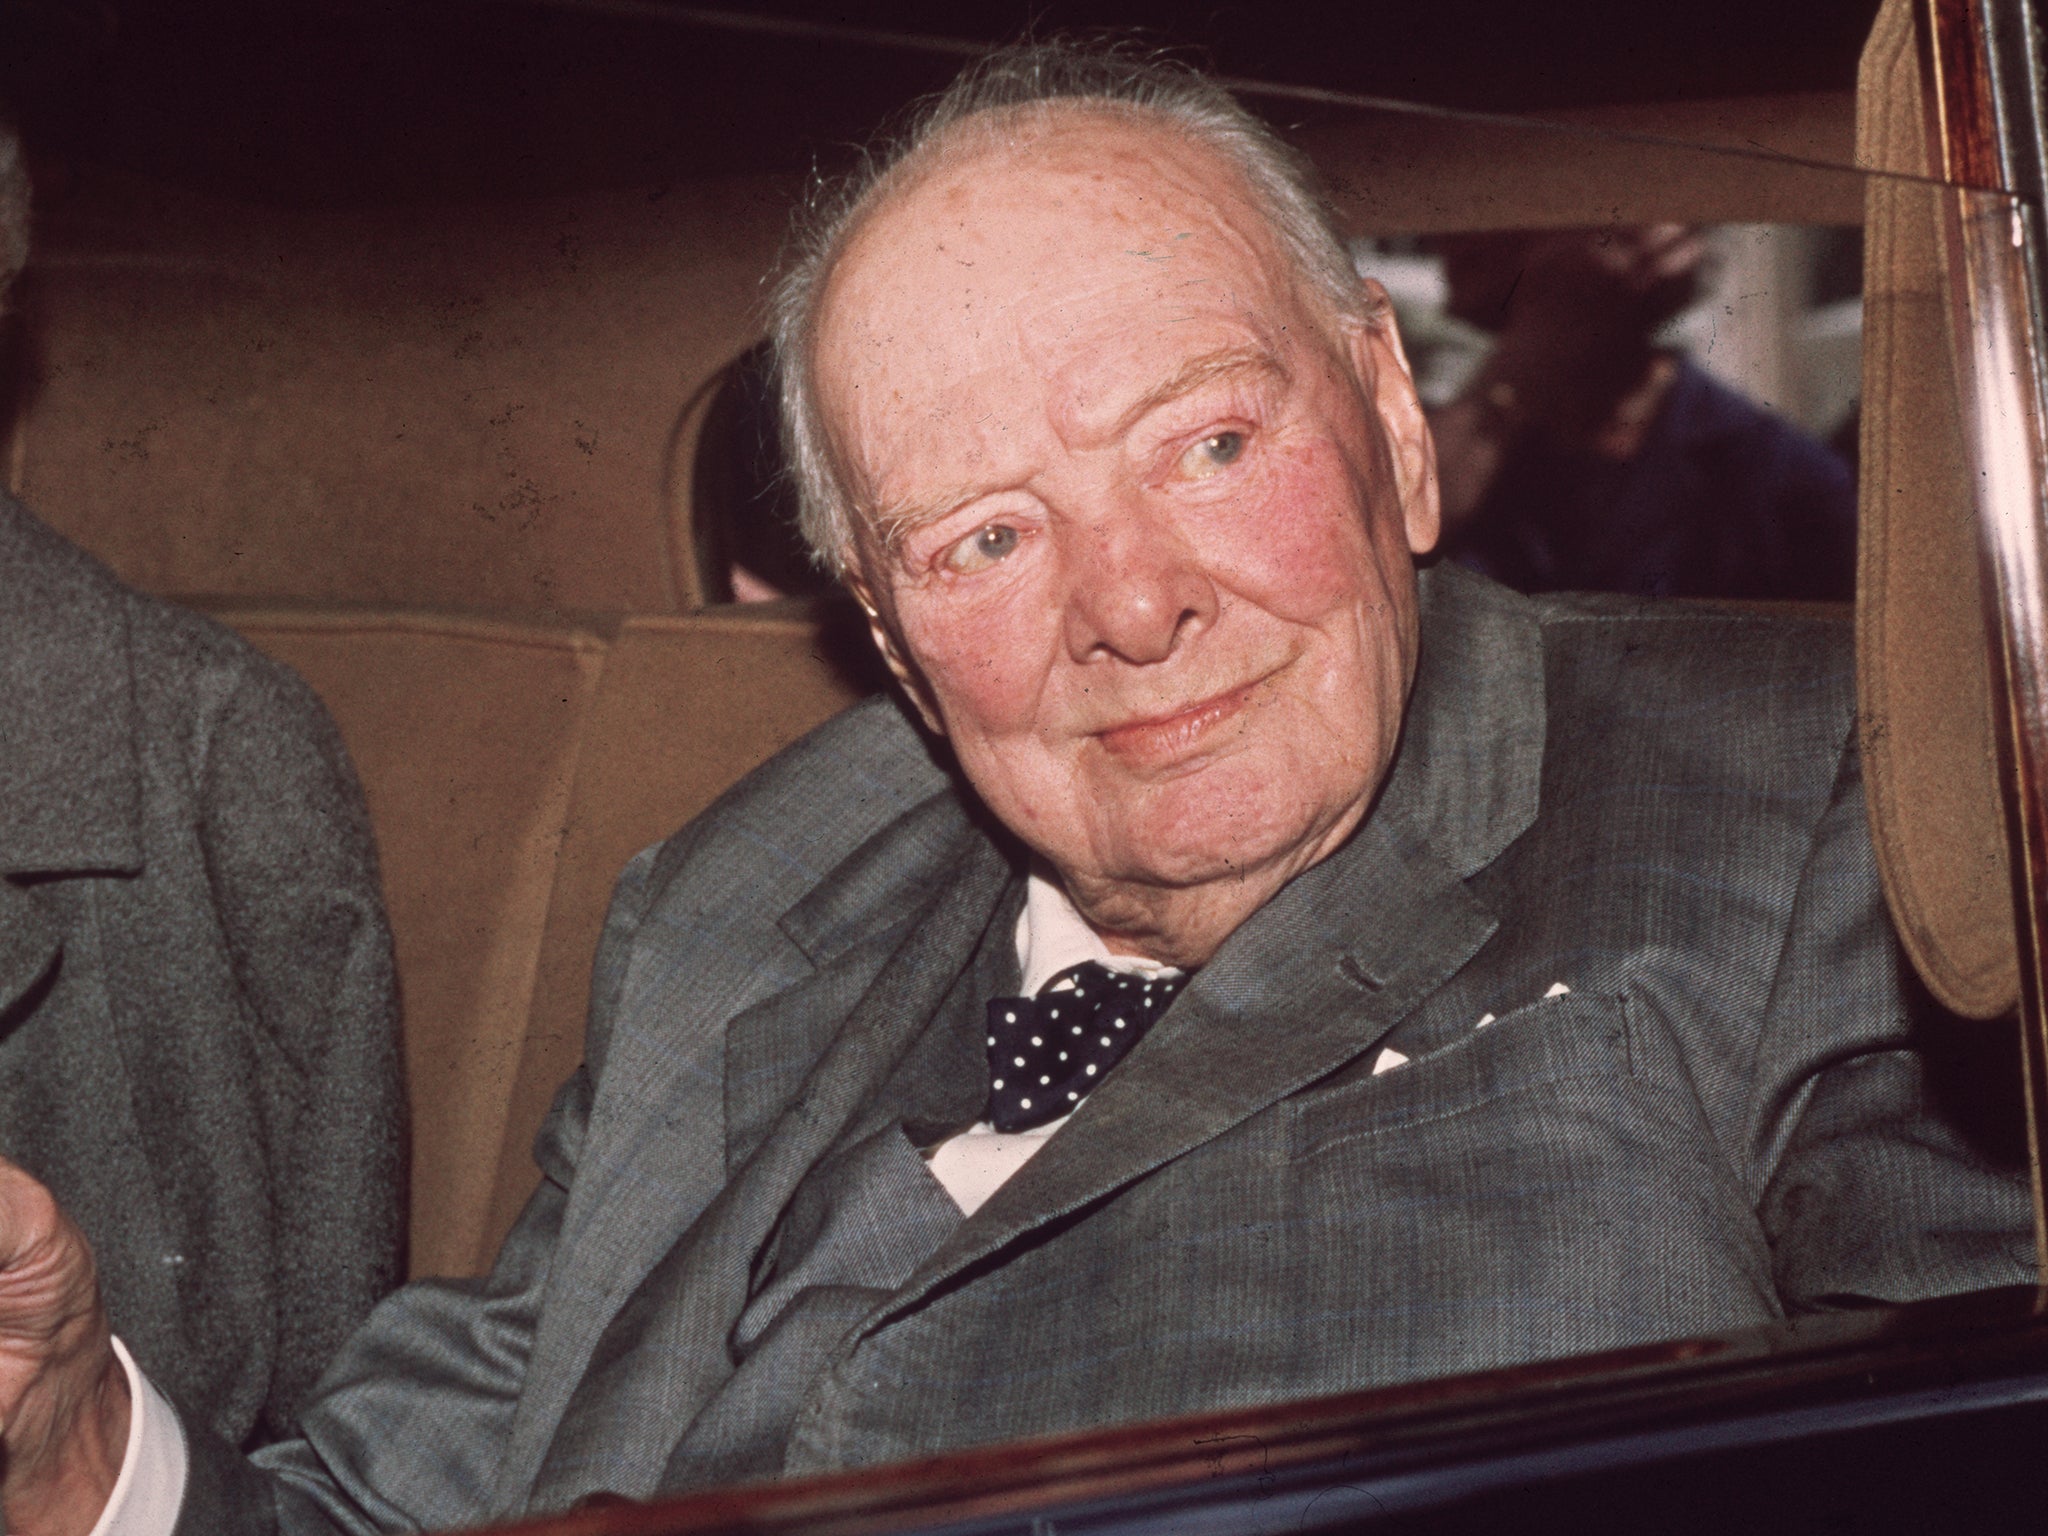 Winston Churchill refused to pay tailor's bill of more than £12,000 ...